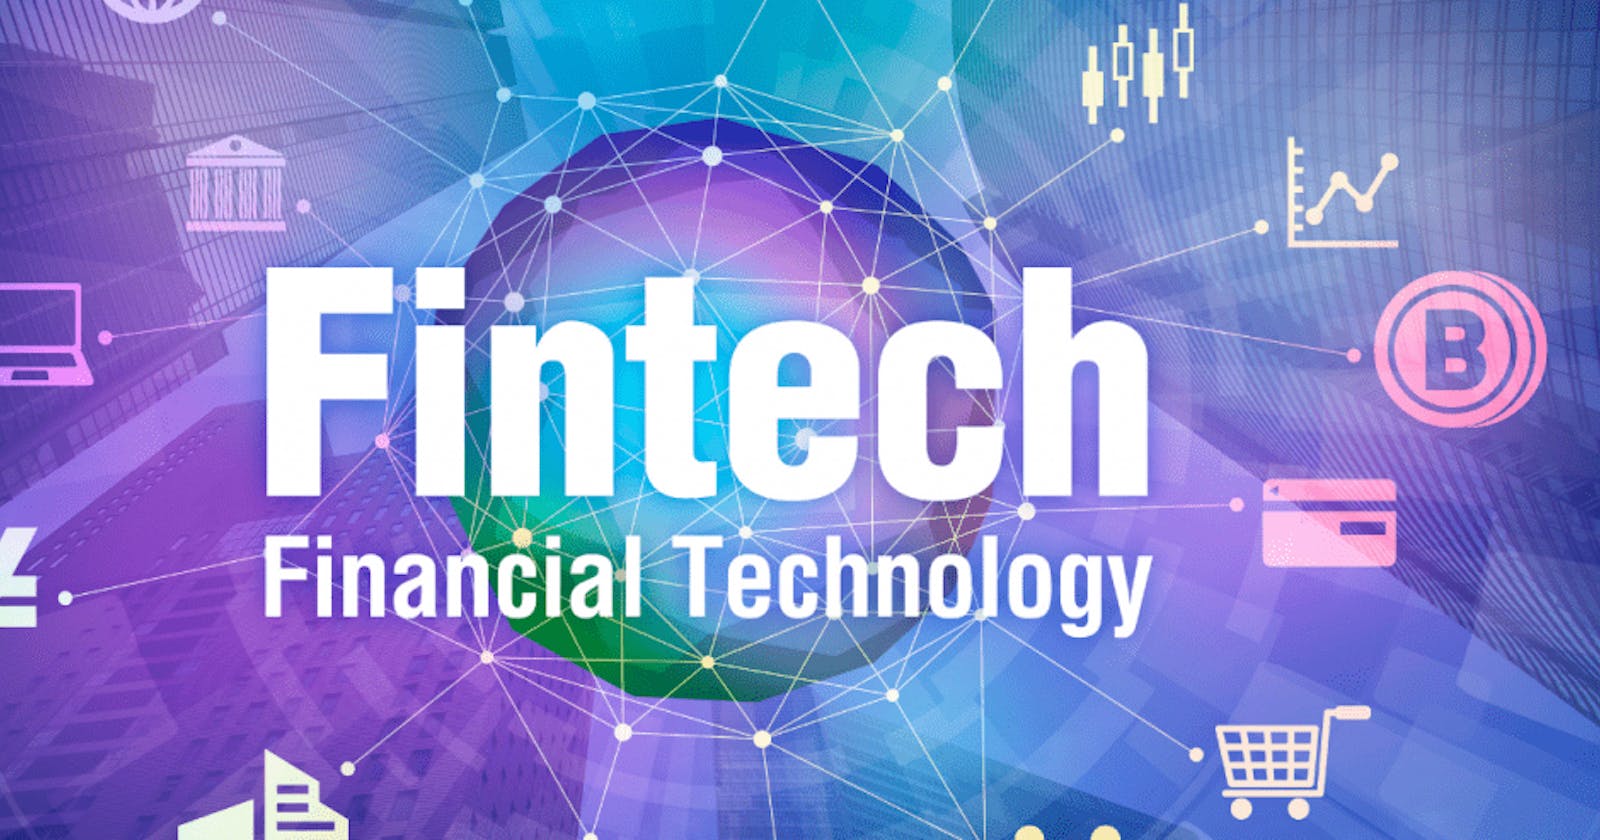 Things to consider when building a fintech solution